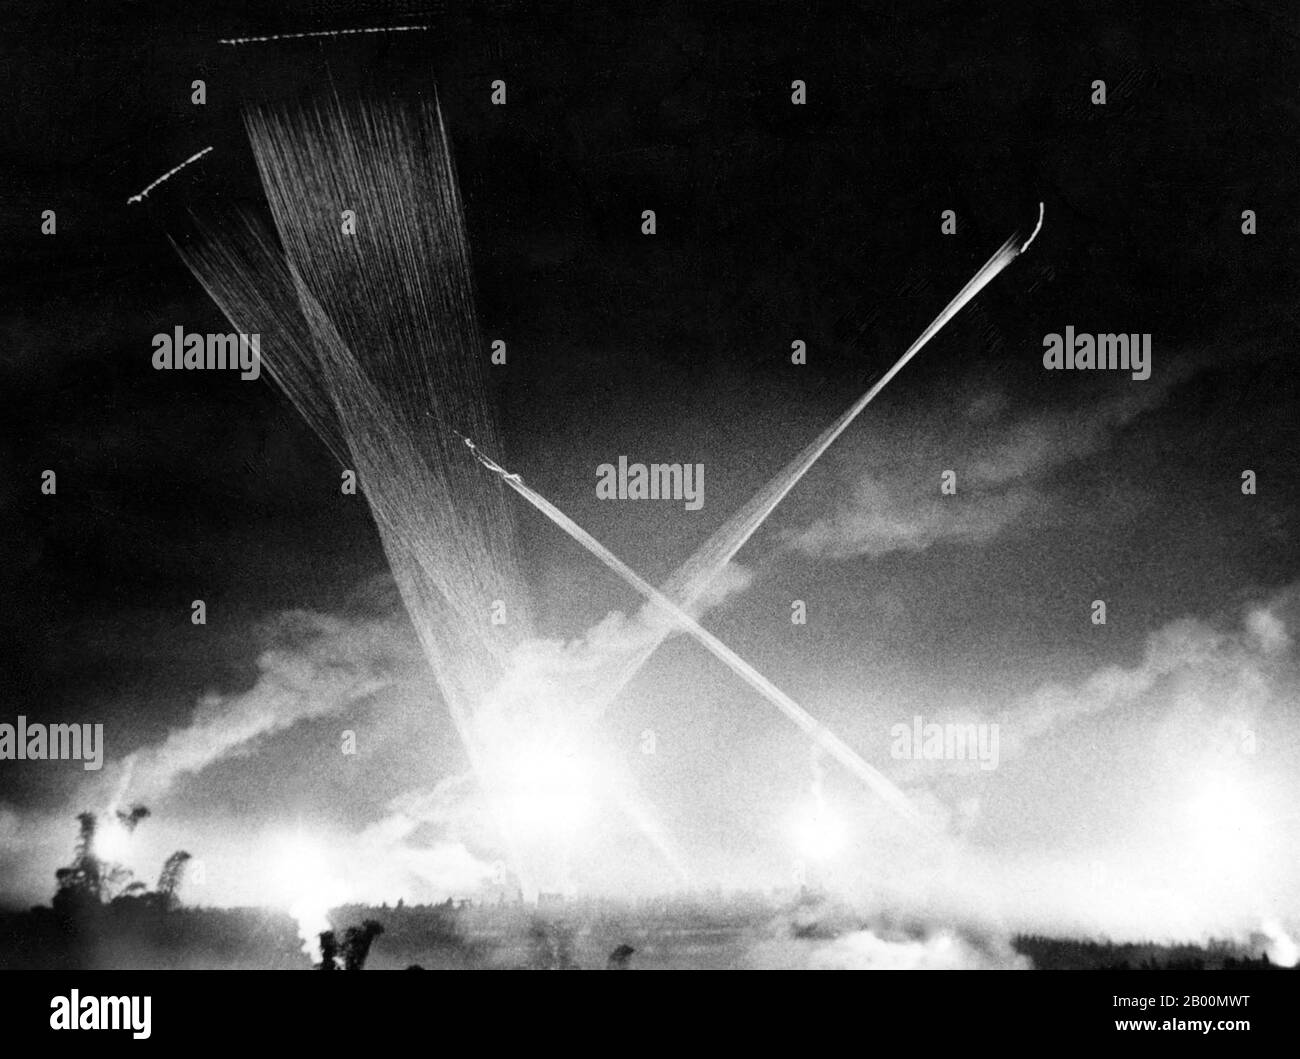 Vietnam: Night attack near Saigon.  This time lapse photo shows tracer round trajectories, probably from a A U.S. Air Force Douglas AC-47D 'Spooky' gunship. The Douglas AC-47 Spooky (also nicknamed 'Puff, the Magic Dragon') was the first in a series of gunships developed by the United States Air Force during the Vietnam War. It was felt that more firepower than could be provided by light and medium ground-attack aircraft was needed in some situations when ground forces called for close air support. Stock Photo